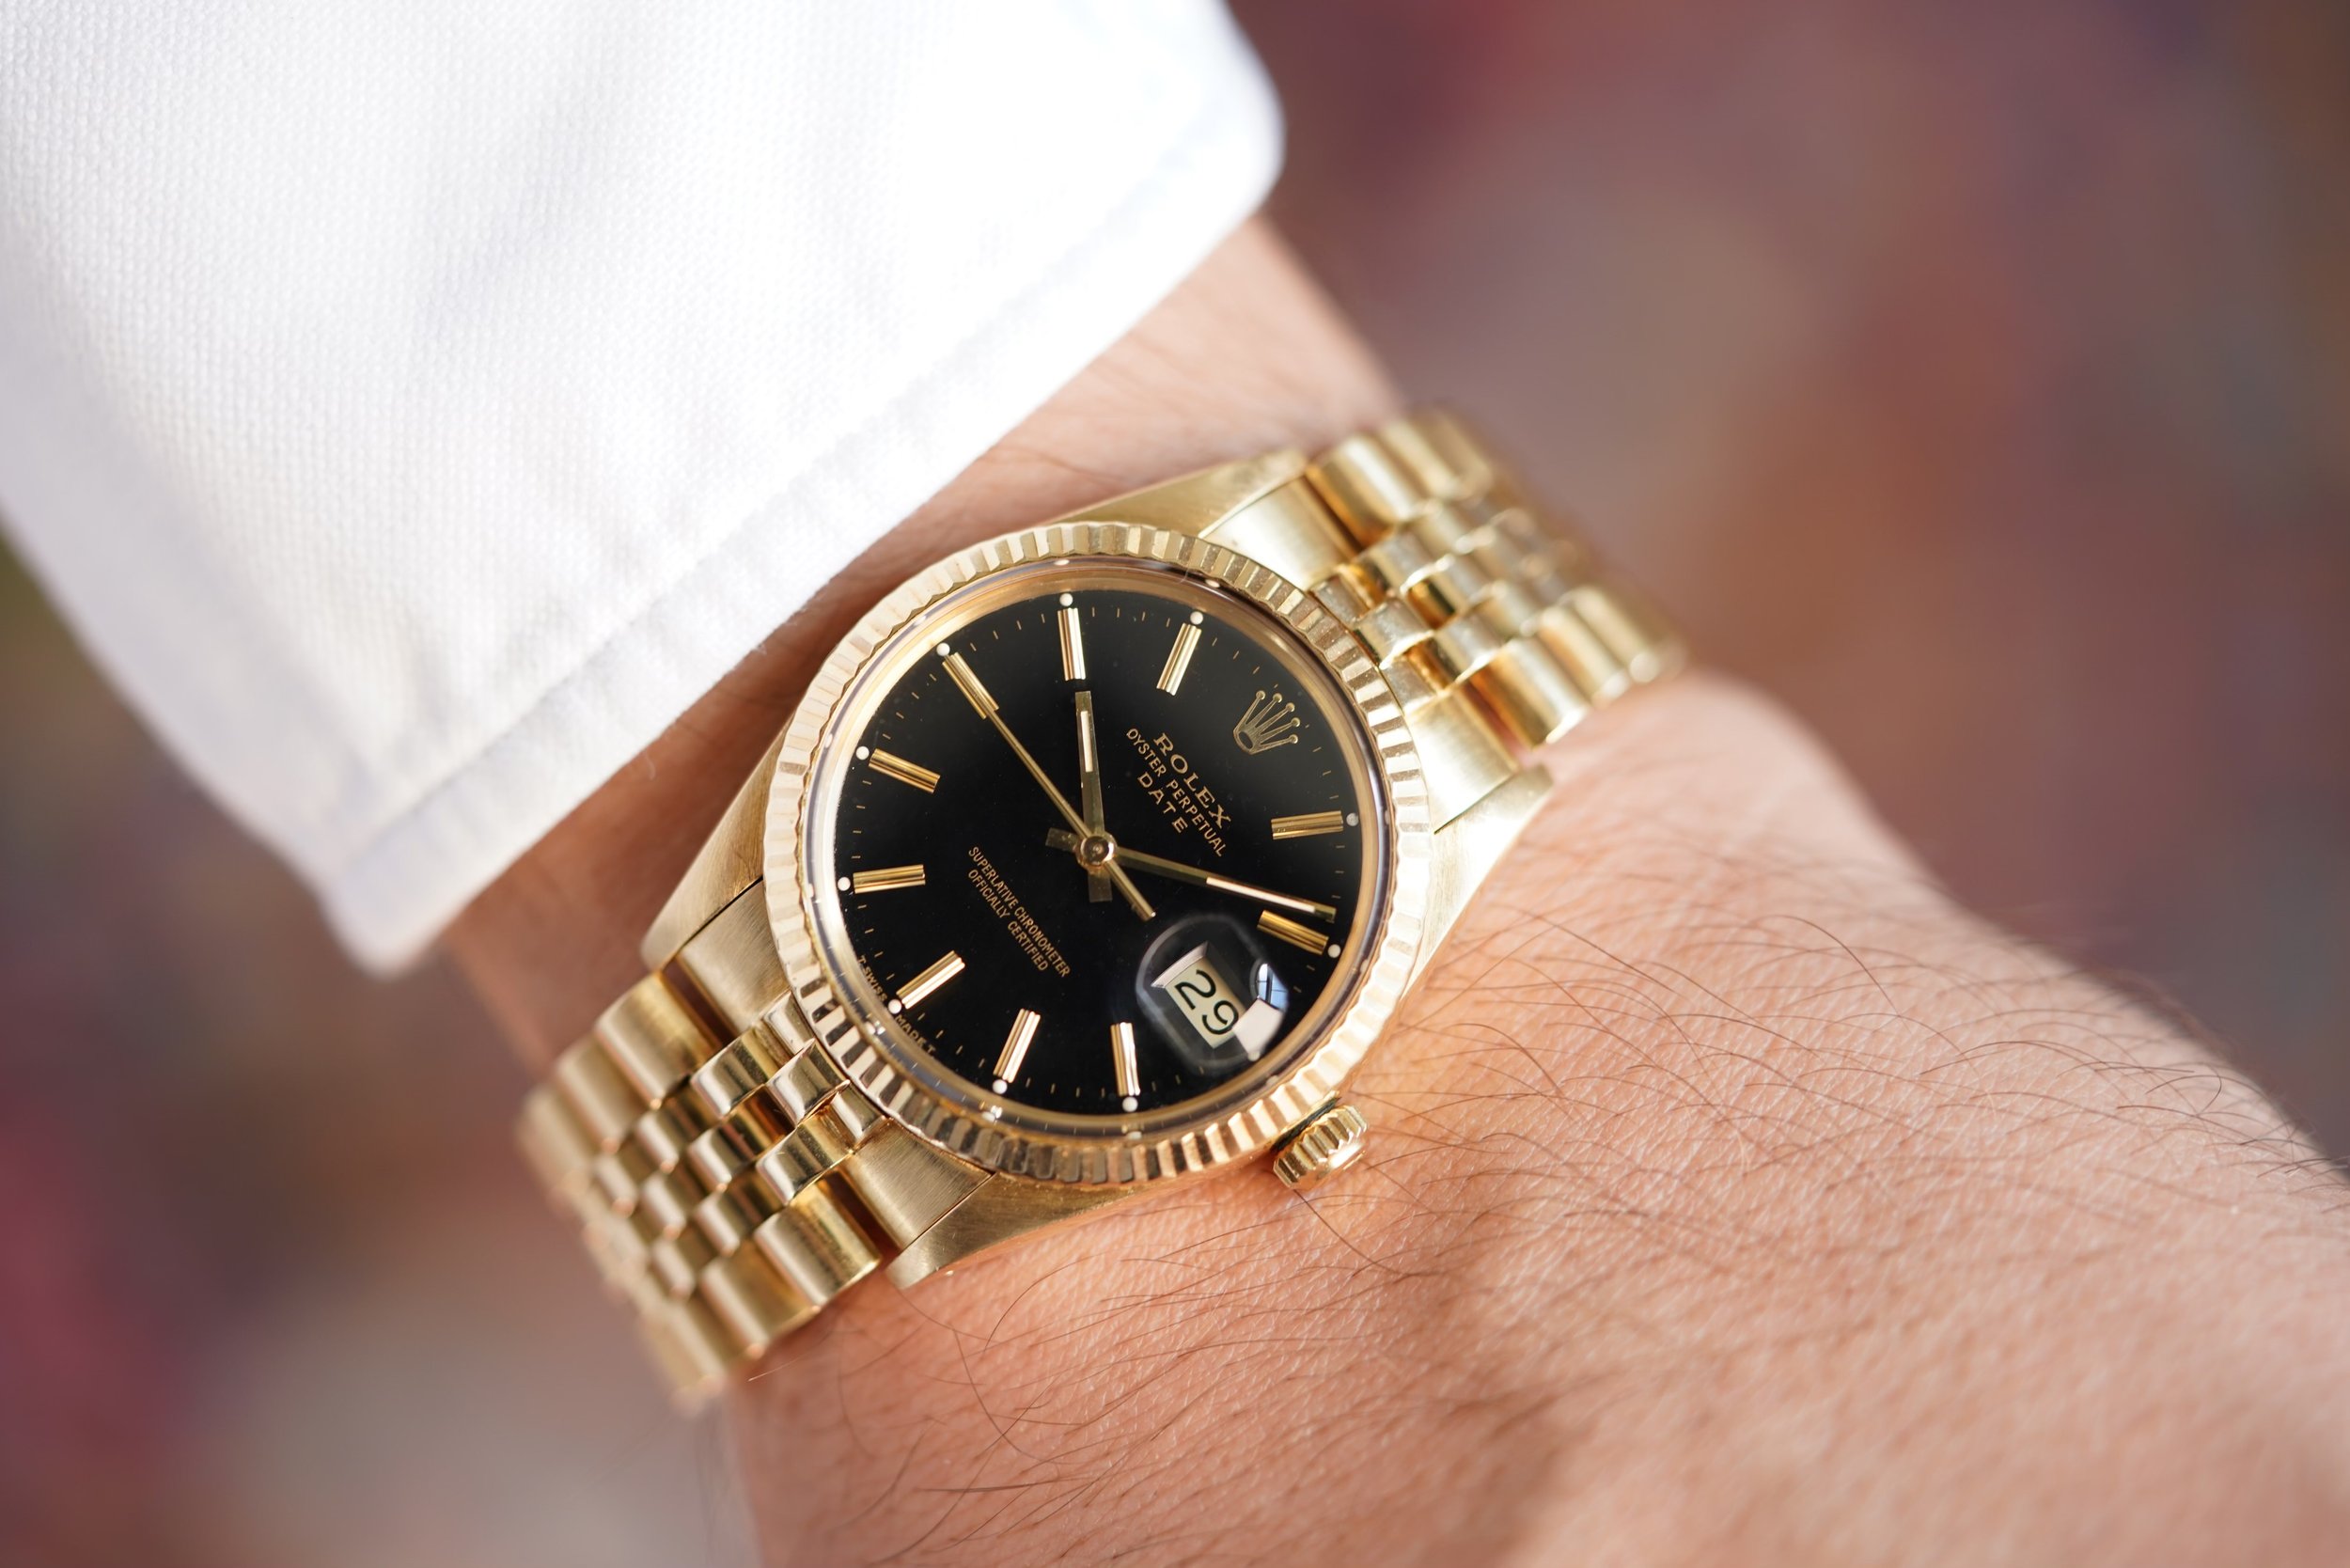 Rolex Date Reference 15037 